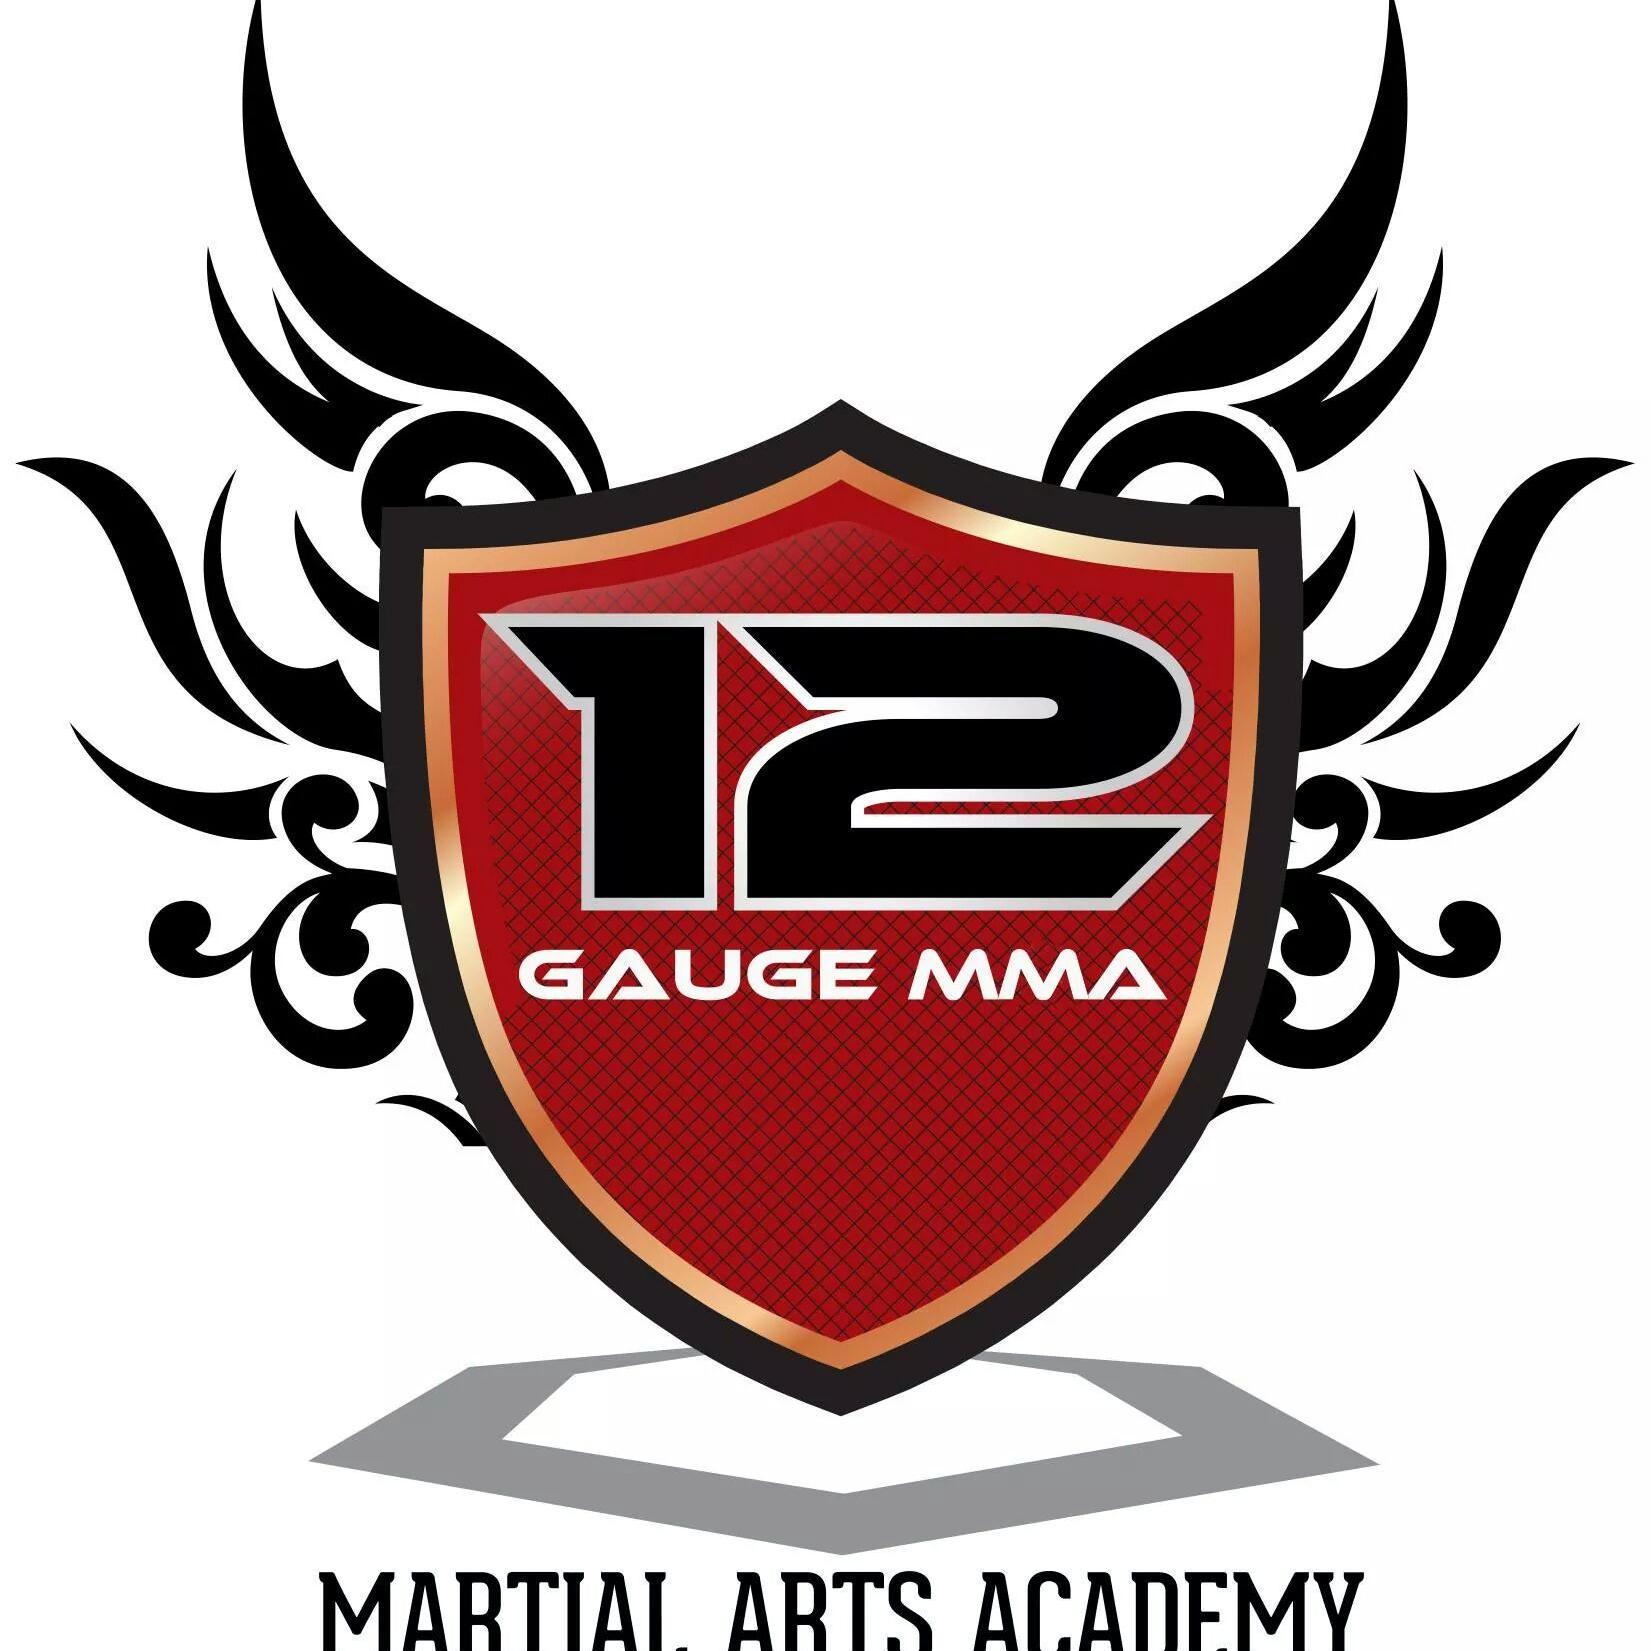 Twitter home of 12gaugemacc ,mma ,kickboxing ,wrestling, grappling ,head coach Carl Burton come join a team that want everyone to succeed,Instagram 12gaugemacc